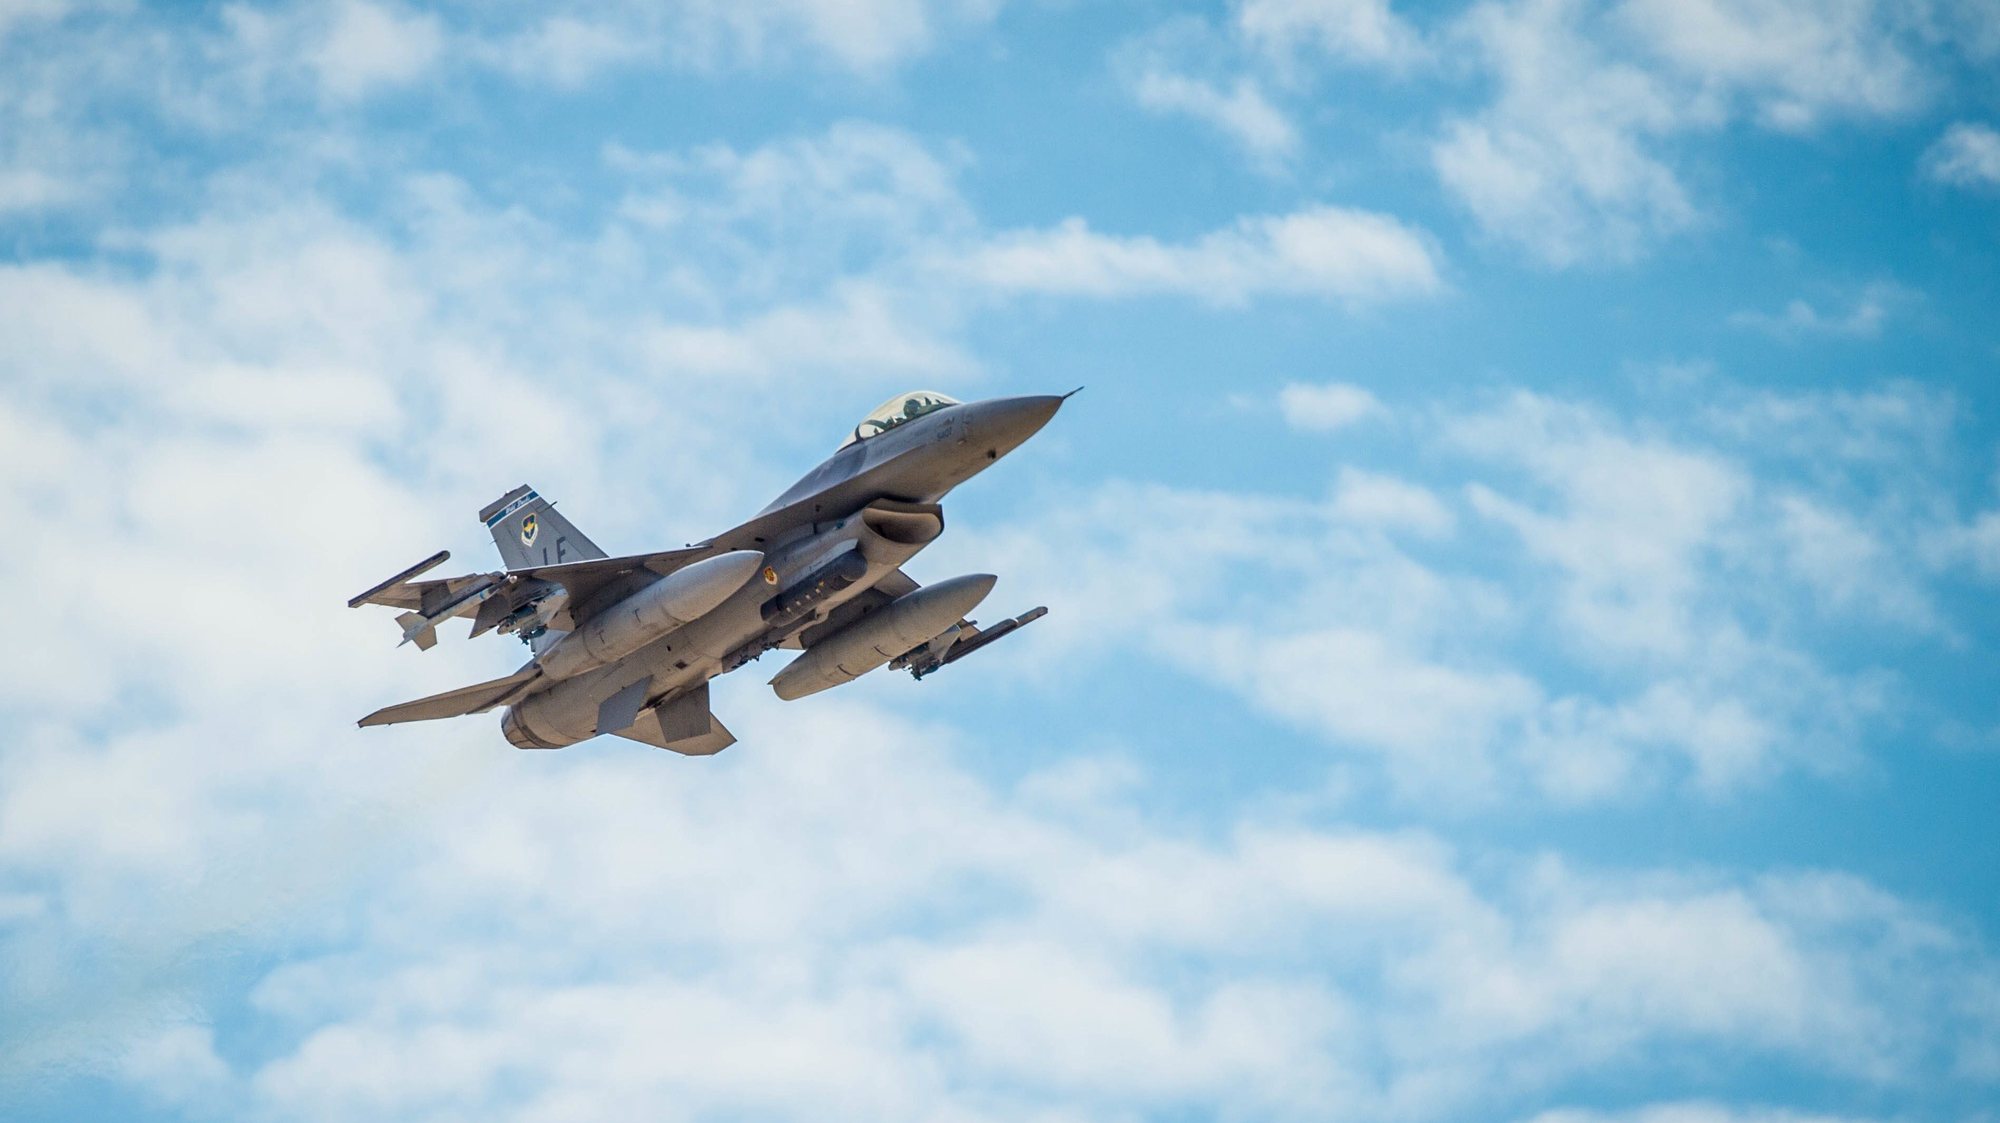 epa06186960 A handout photo made available by the 56 Fighter Wing Public Affairs Office of the US Air Force shows an F-16 Fighting Falcon flying over the flightline at Luke Air Force Base, in Arizona, USA, 21 August 2017. According to media reports on 05 September 2017, an F-16 Fighting Falcon, piloted by an Arizona National Guard pilot, crashed in the Arizona desert around 20 miles (32 km) northwest of the city of Safford. The jet was a part of the 162nd Wing of the Arizona Air National Guard. The pilot of the F-16 died in the crash and their identity has not been released. There were no other reports of injuries or fatalities.  EPA/STAFF SGT. JENSEN STIDHAM / US AIR FORCE / HANDOUT  HANDOUT EDITORIAL USE ONLY/NO SALES